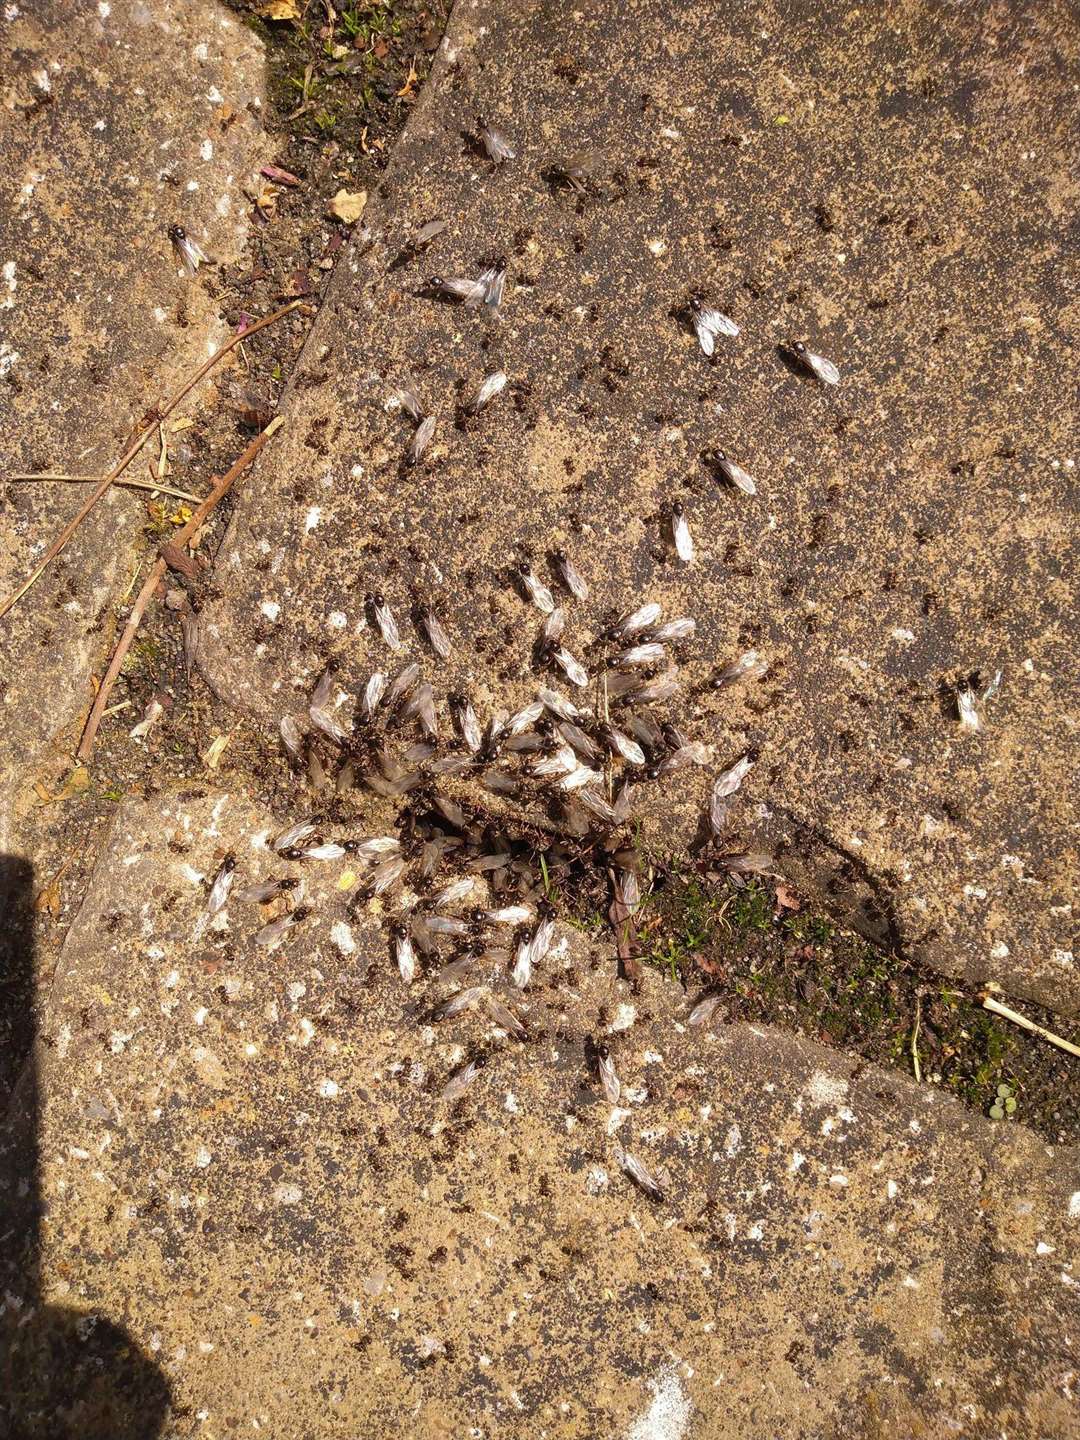 Flying ants were spotted in Kent throughout the day. Picture: @RosalindinKent/Twitter